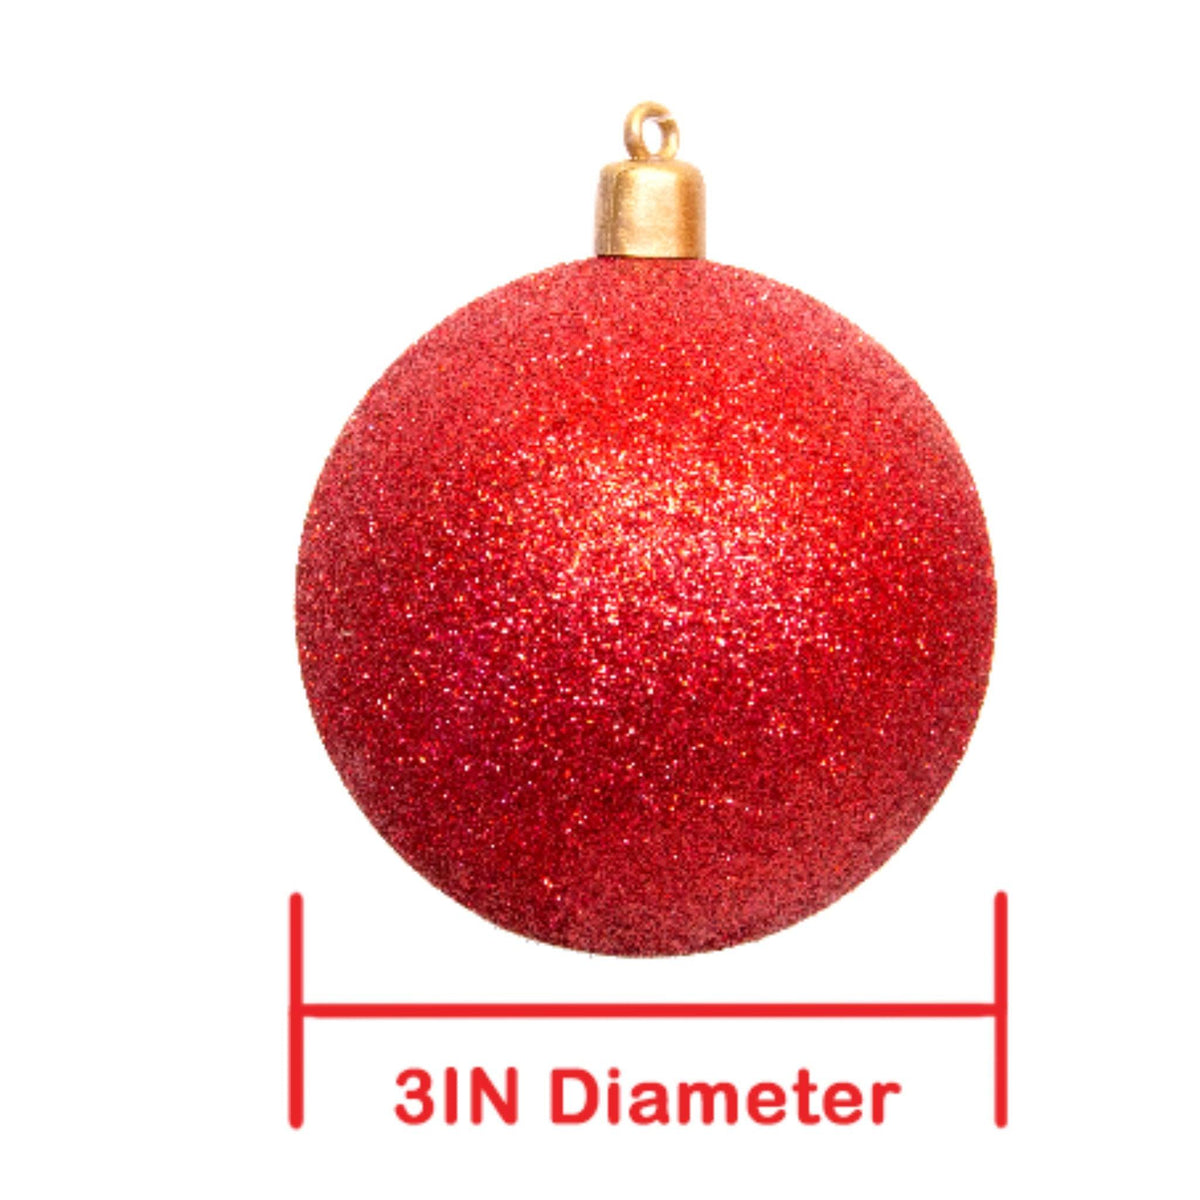 Lee Display offers brand new Shiny Glitter Red Plastic Ball Ornaments at wholesale prices for affordable Christmas Tree Hanging and Holiday Decorating on sale at leedisplay.com